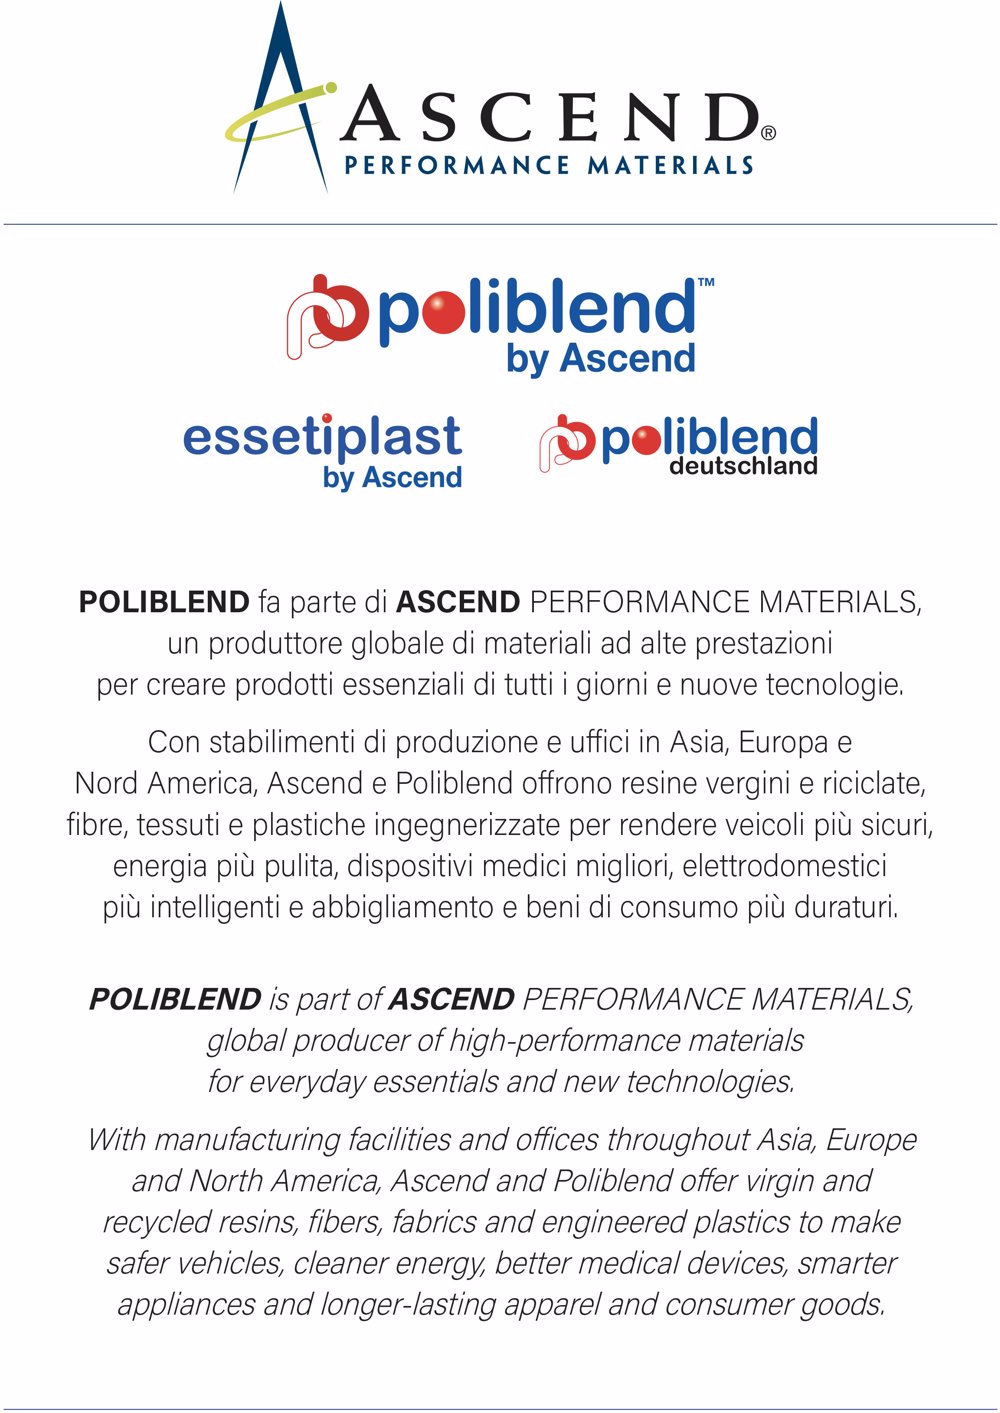 POLIBLEND BY ASCEND